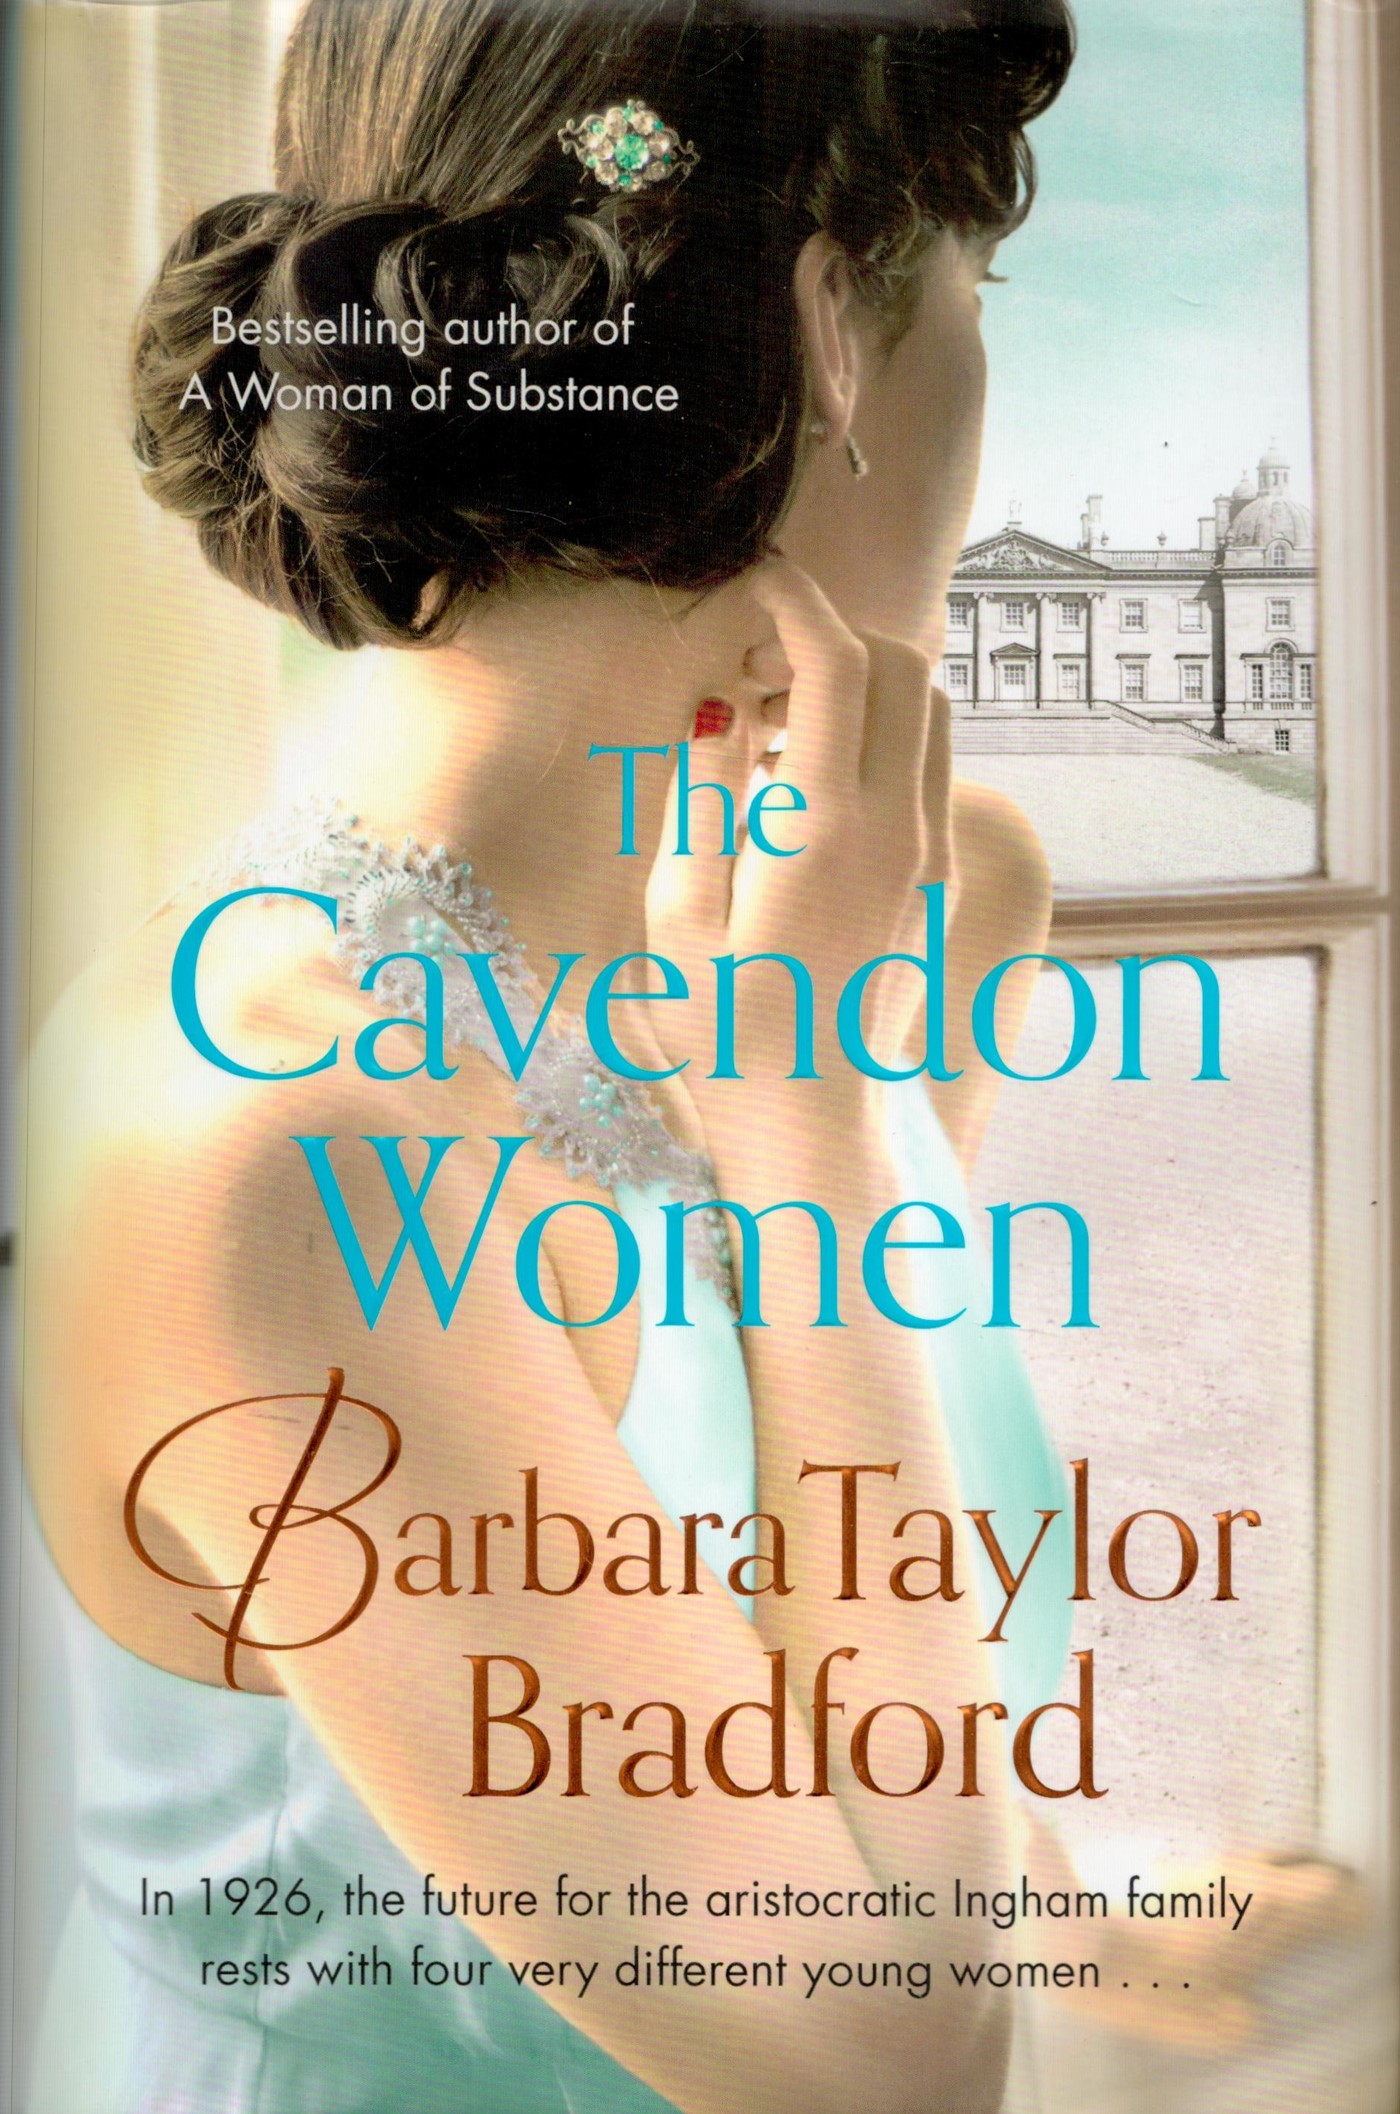 The Cavendon Women by Barbara Taylor Bradford Hardback Book 2015 First Edition published by Harper